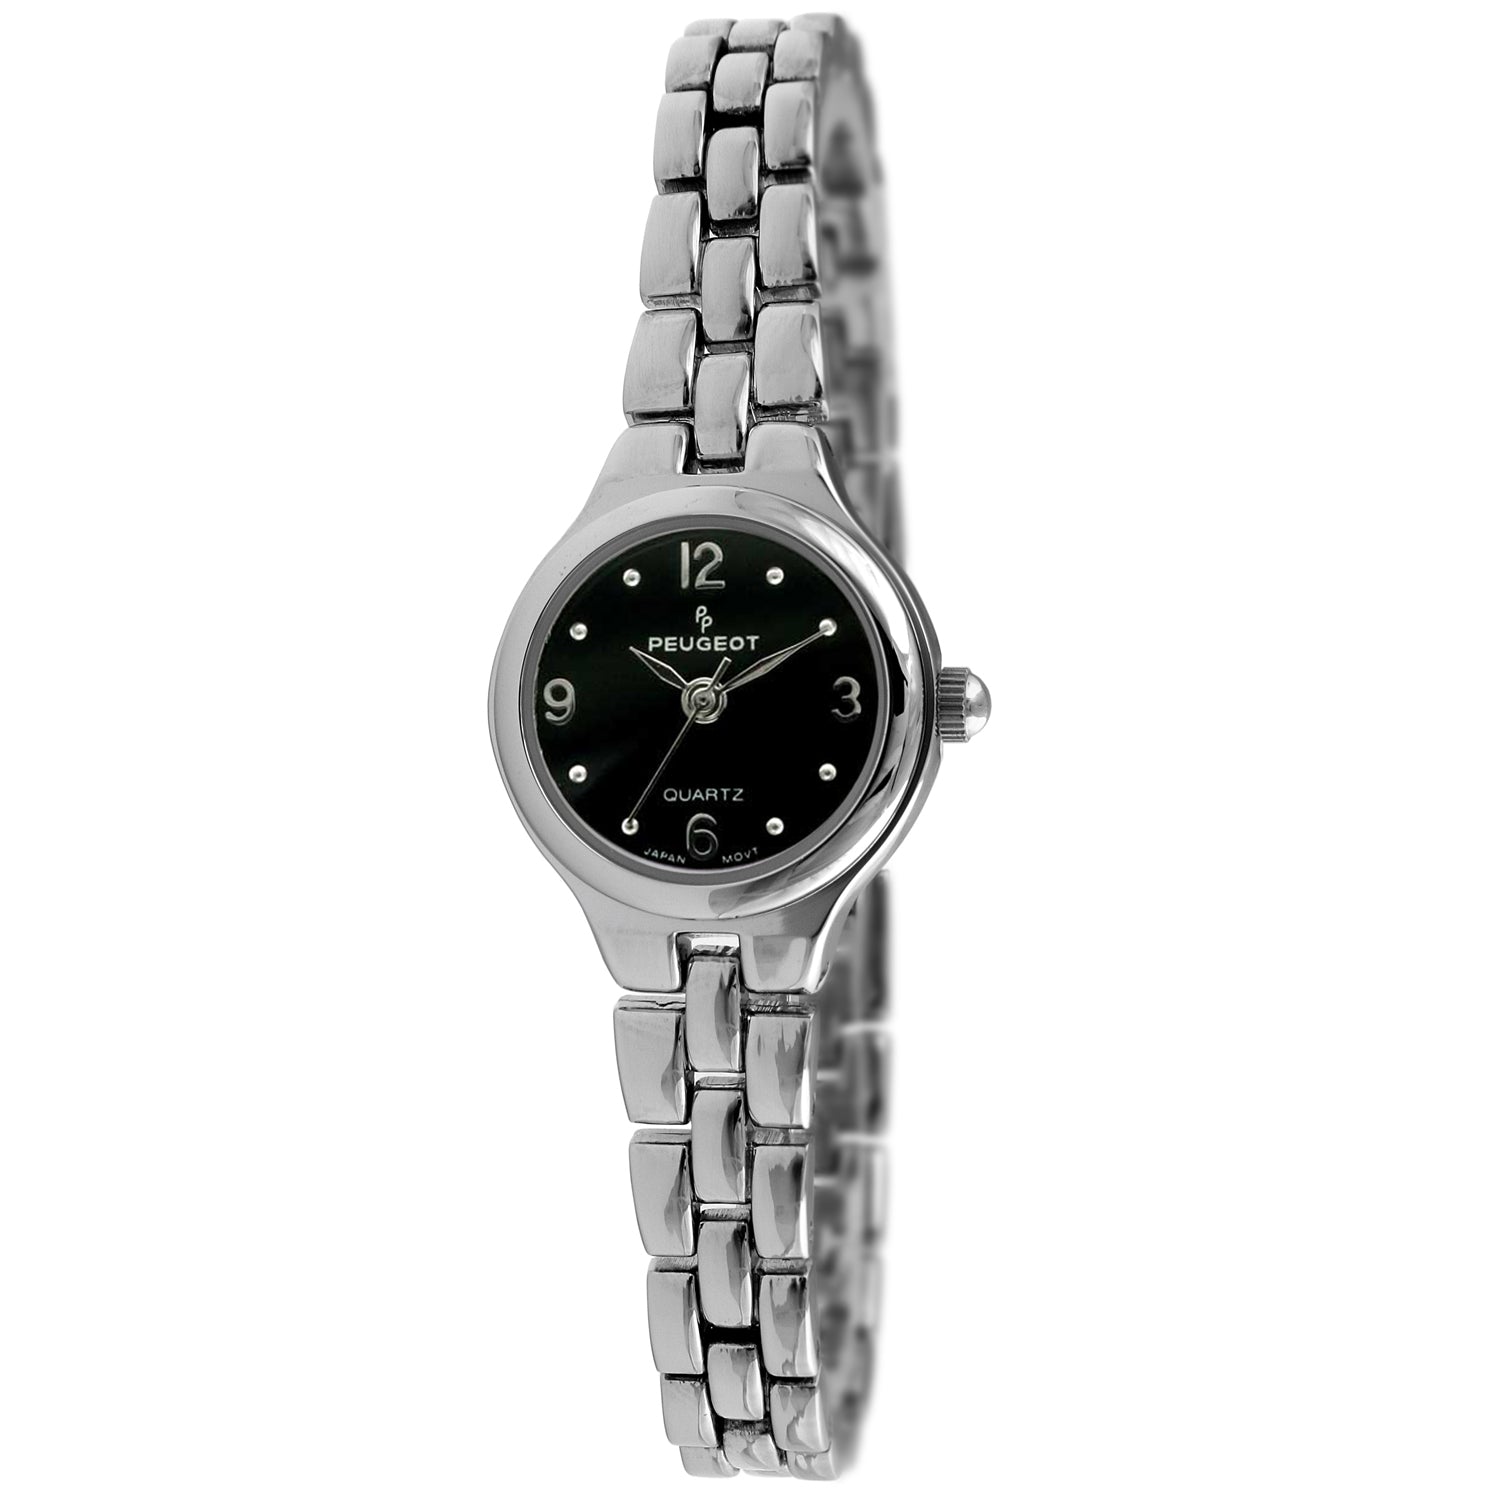 Peugeot Men's Watch Stainless Steel Bracelet with Day Date and Silver Dial  - Peugeot Watches